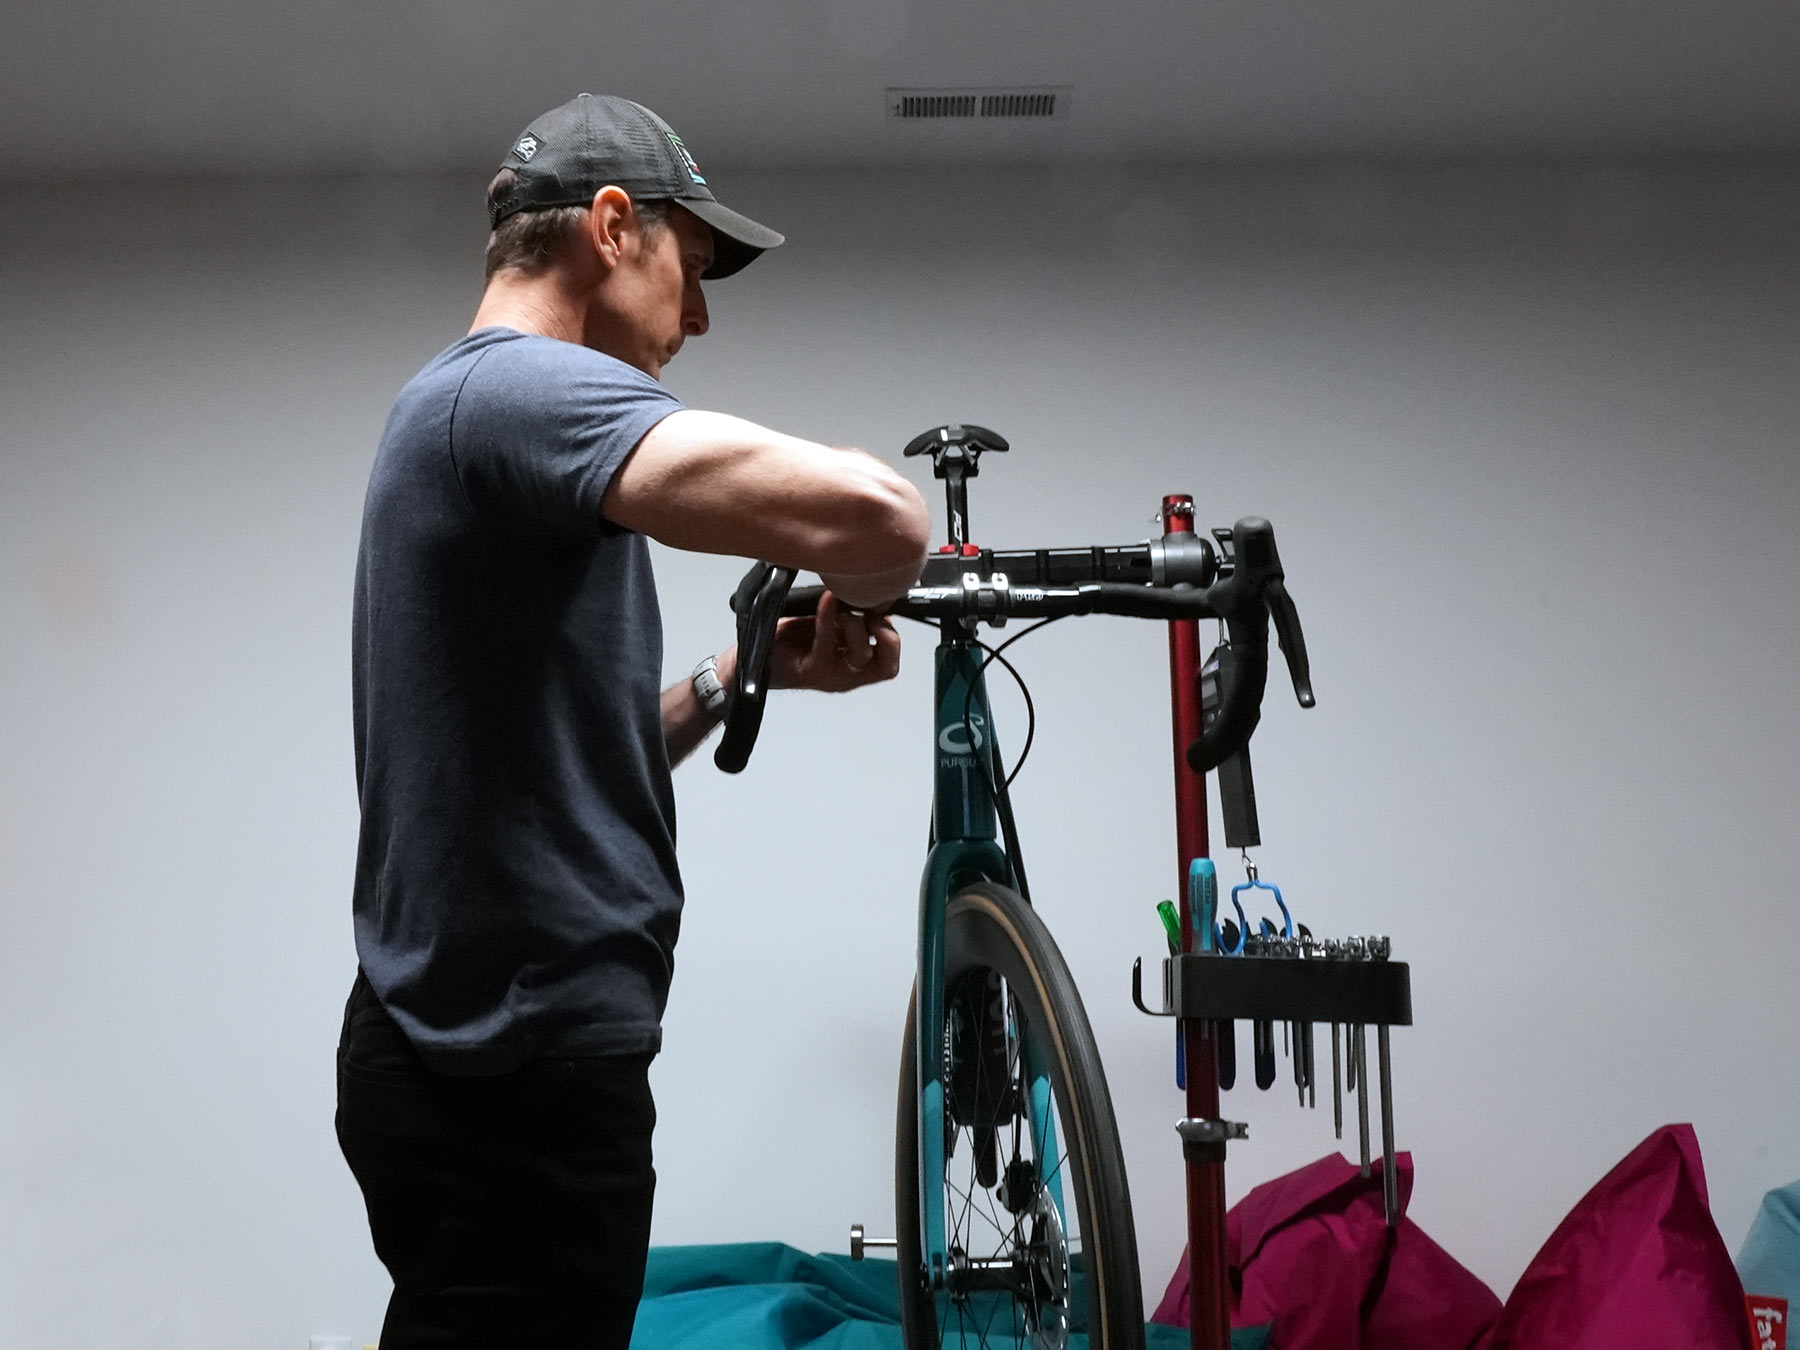 tyler working on a road bike with shimano ultegra